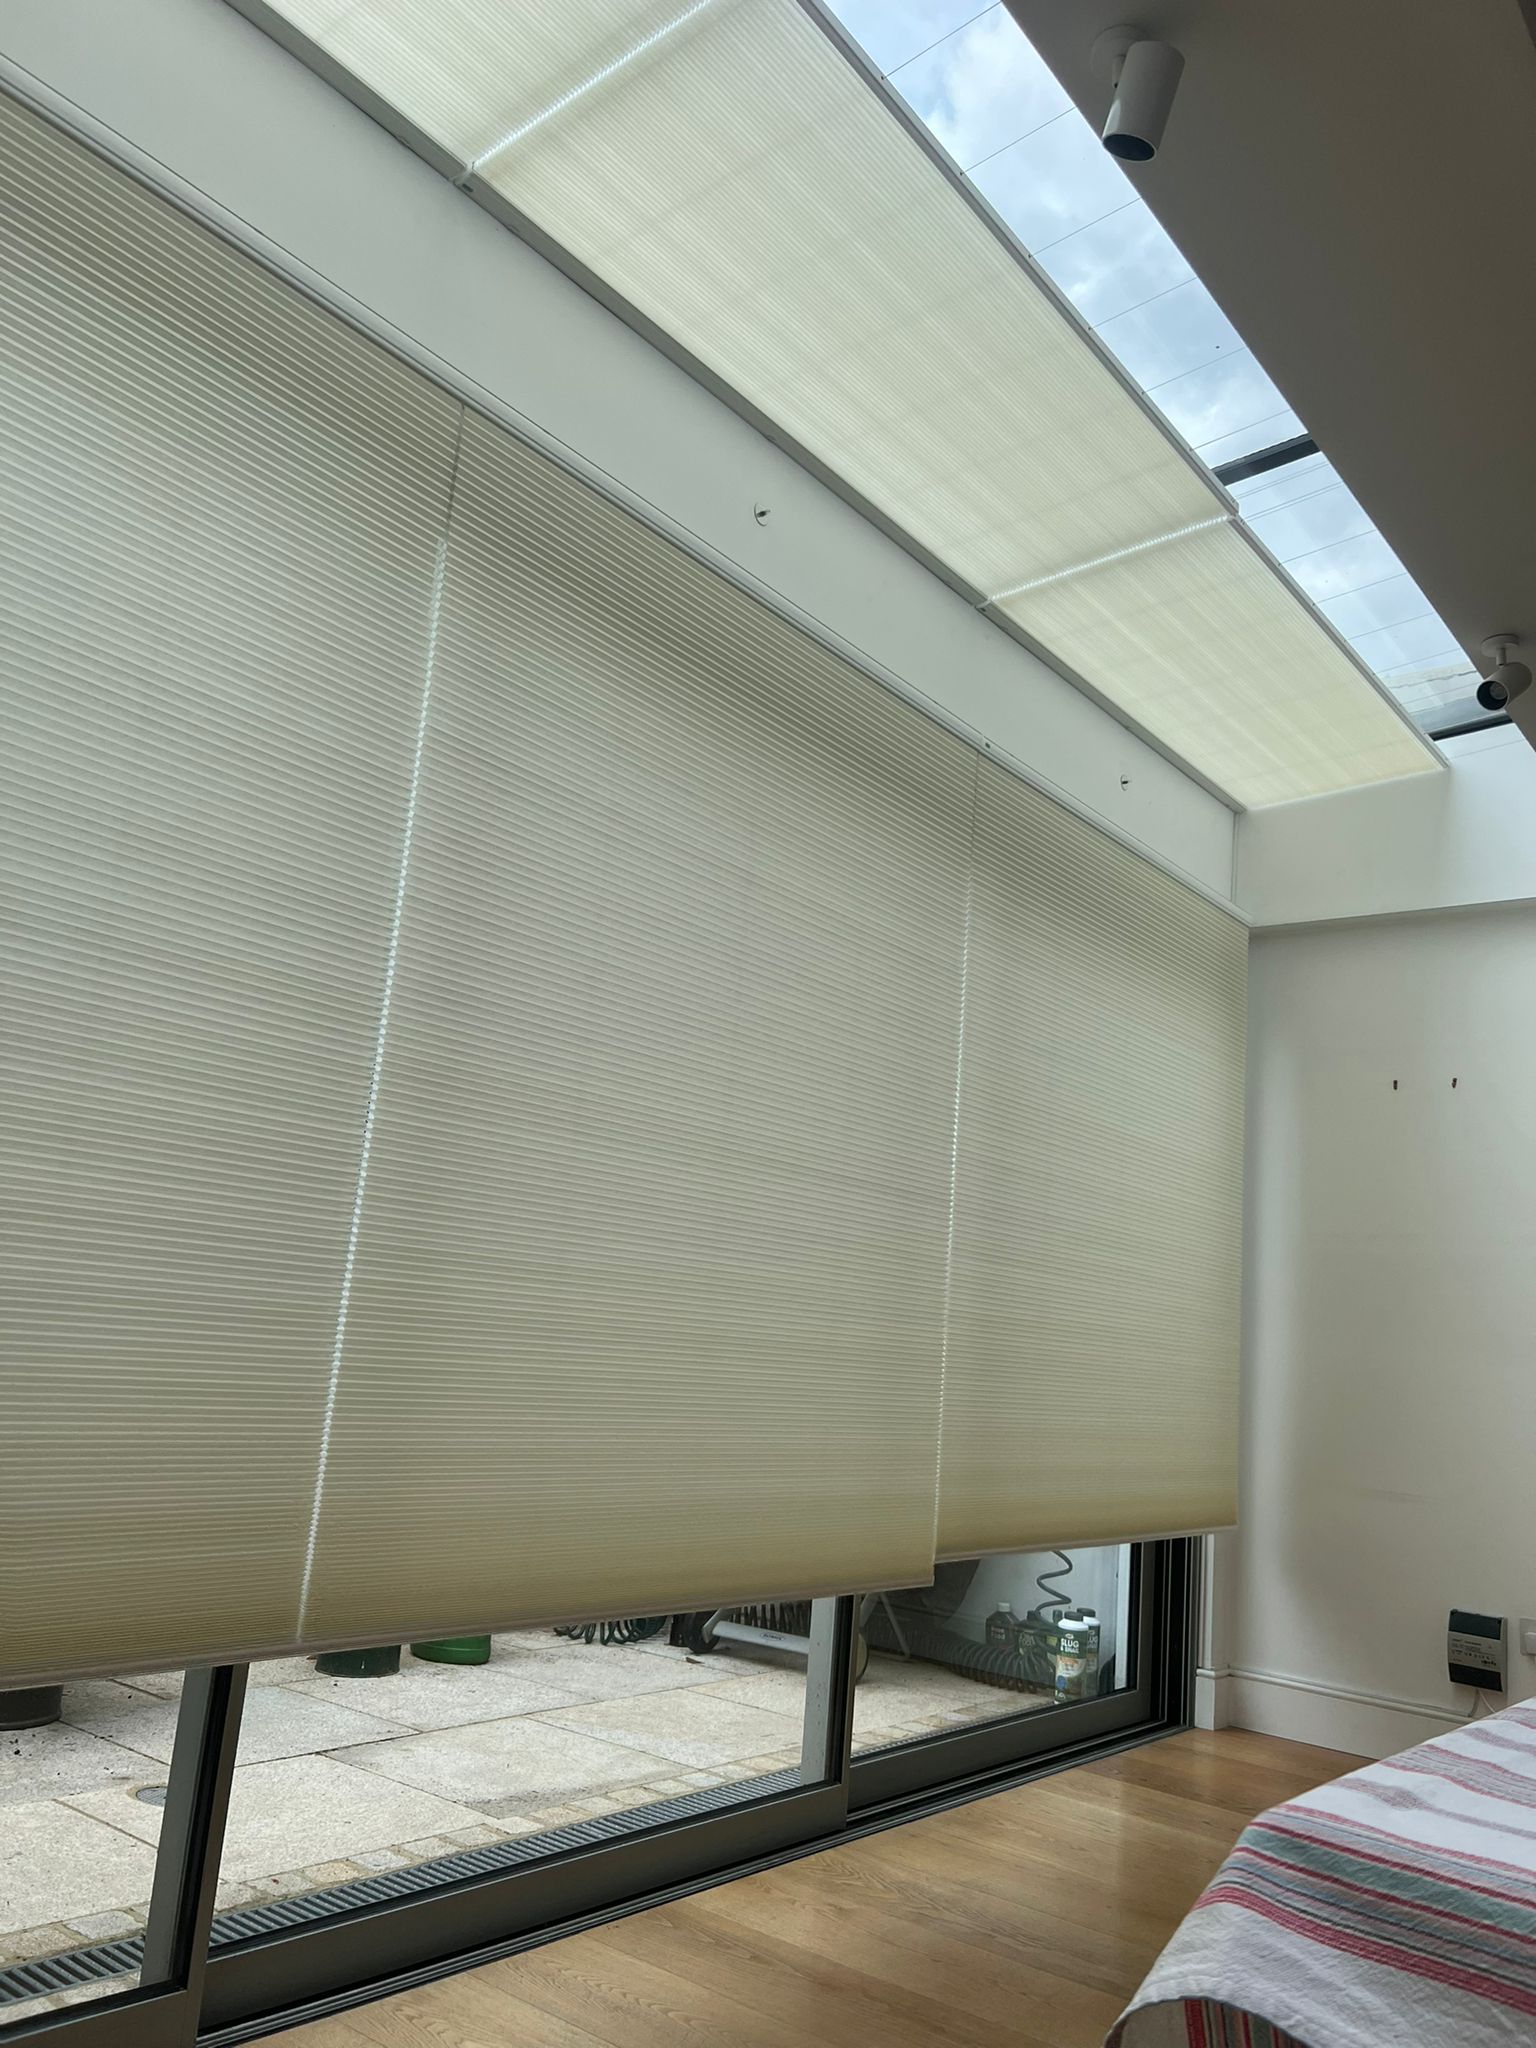 ULTRA Smart Honeycomb blinds on doors and roof